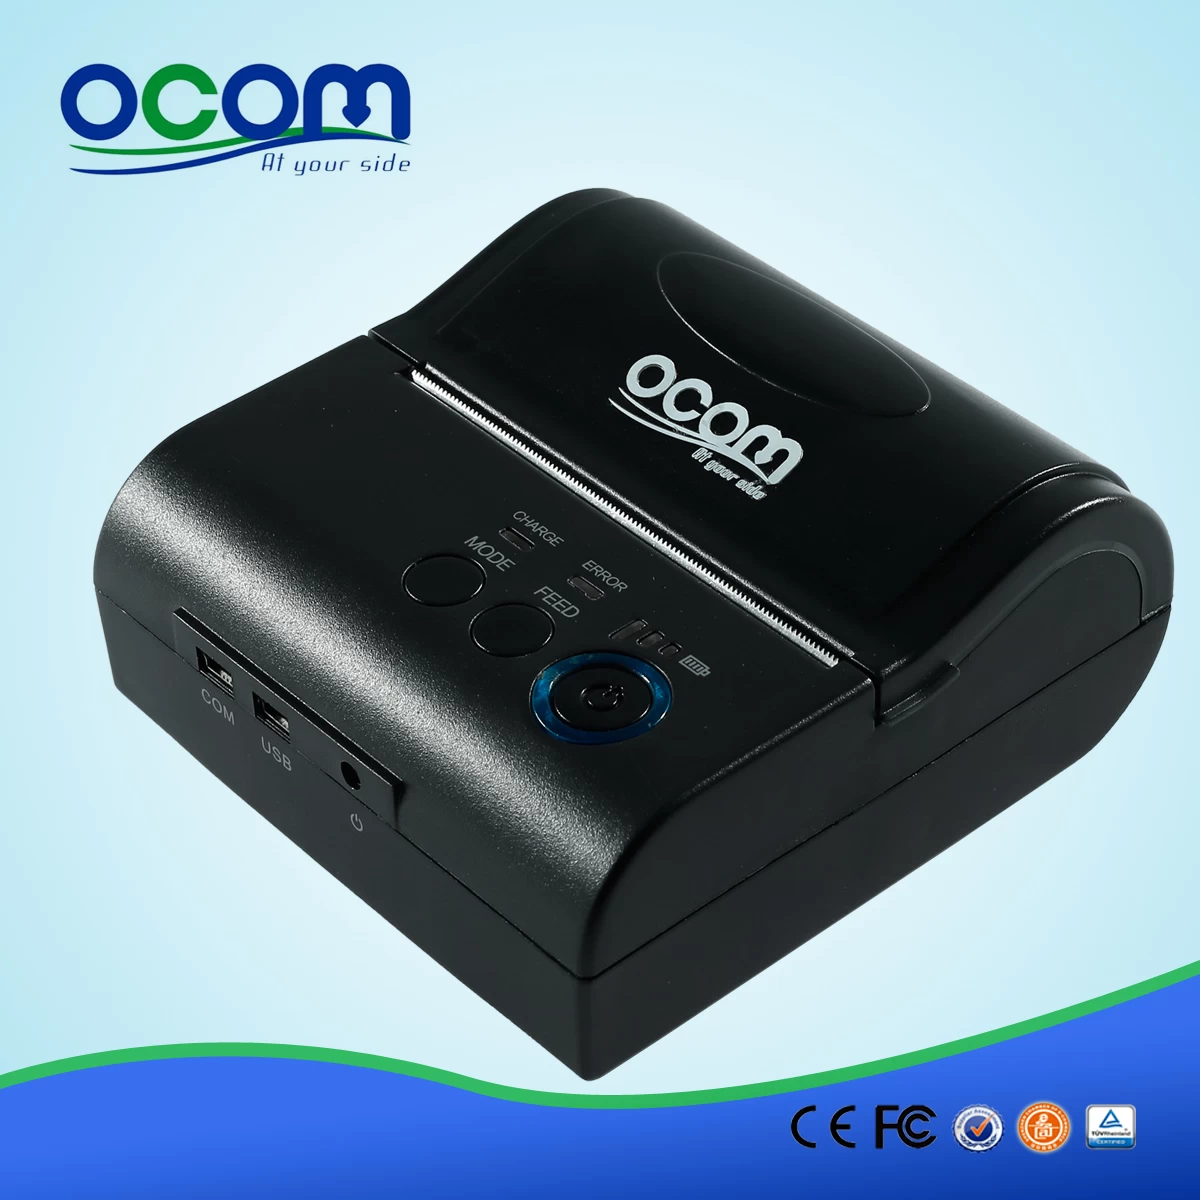 80mm mobile thermal bluetooth printer support WIFI (OCPP-M082)